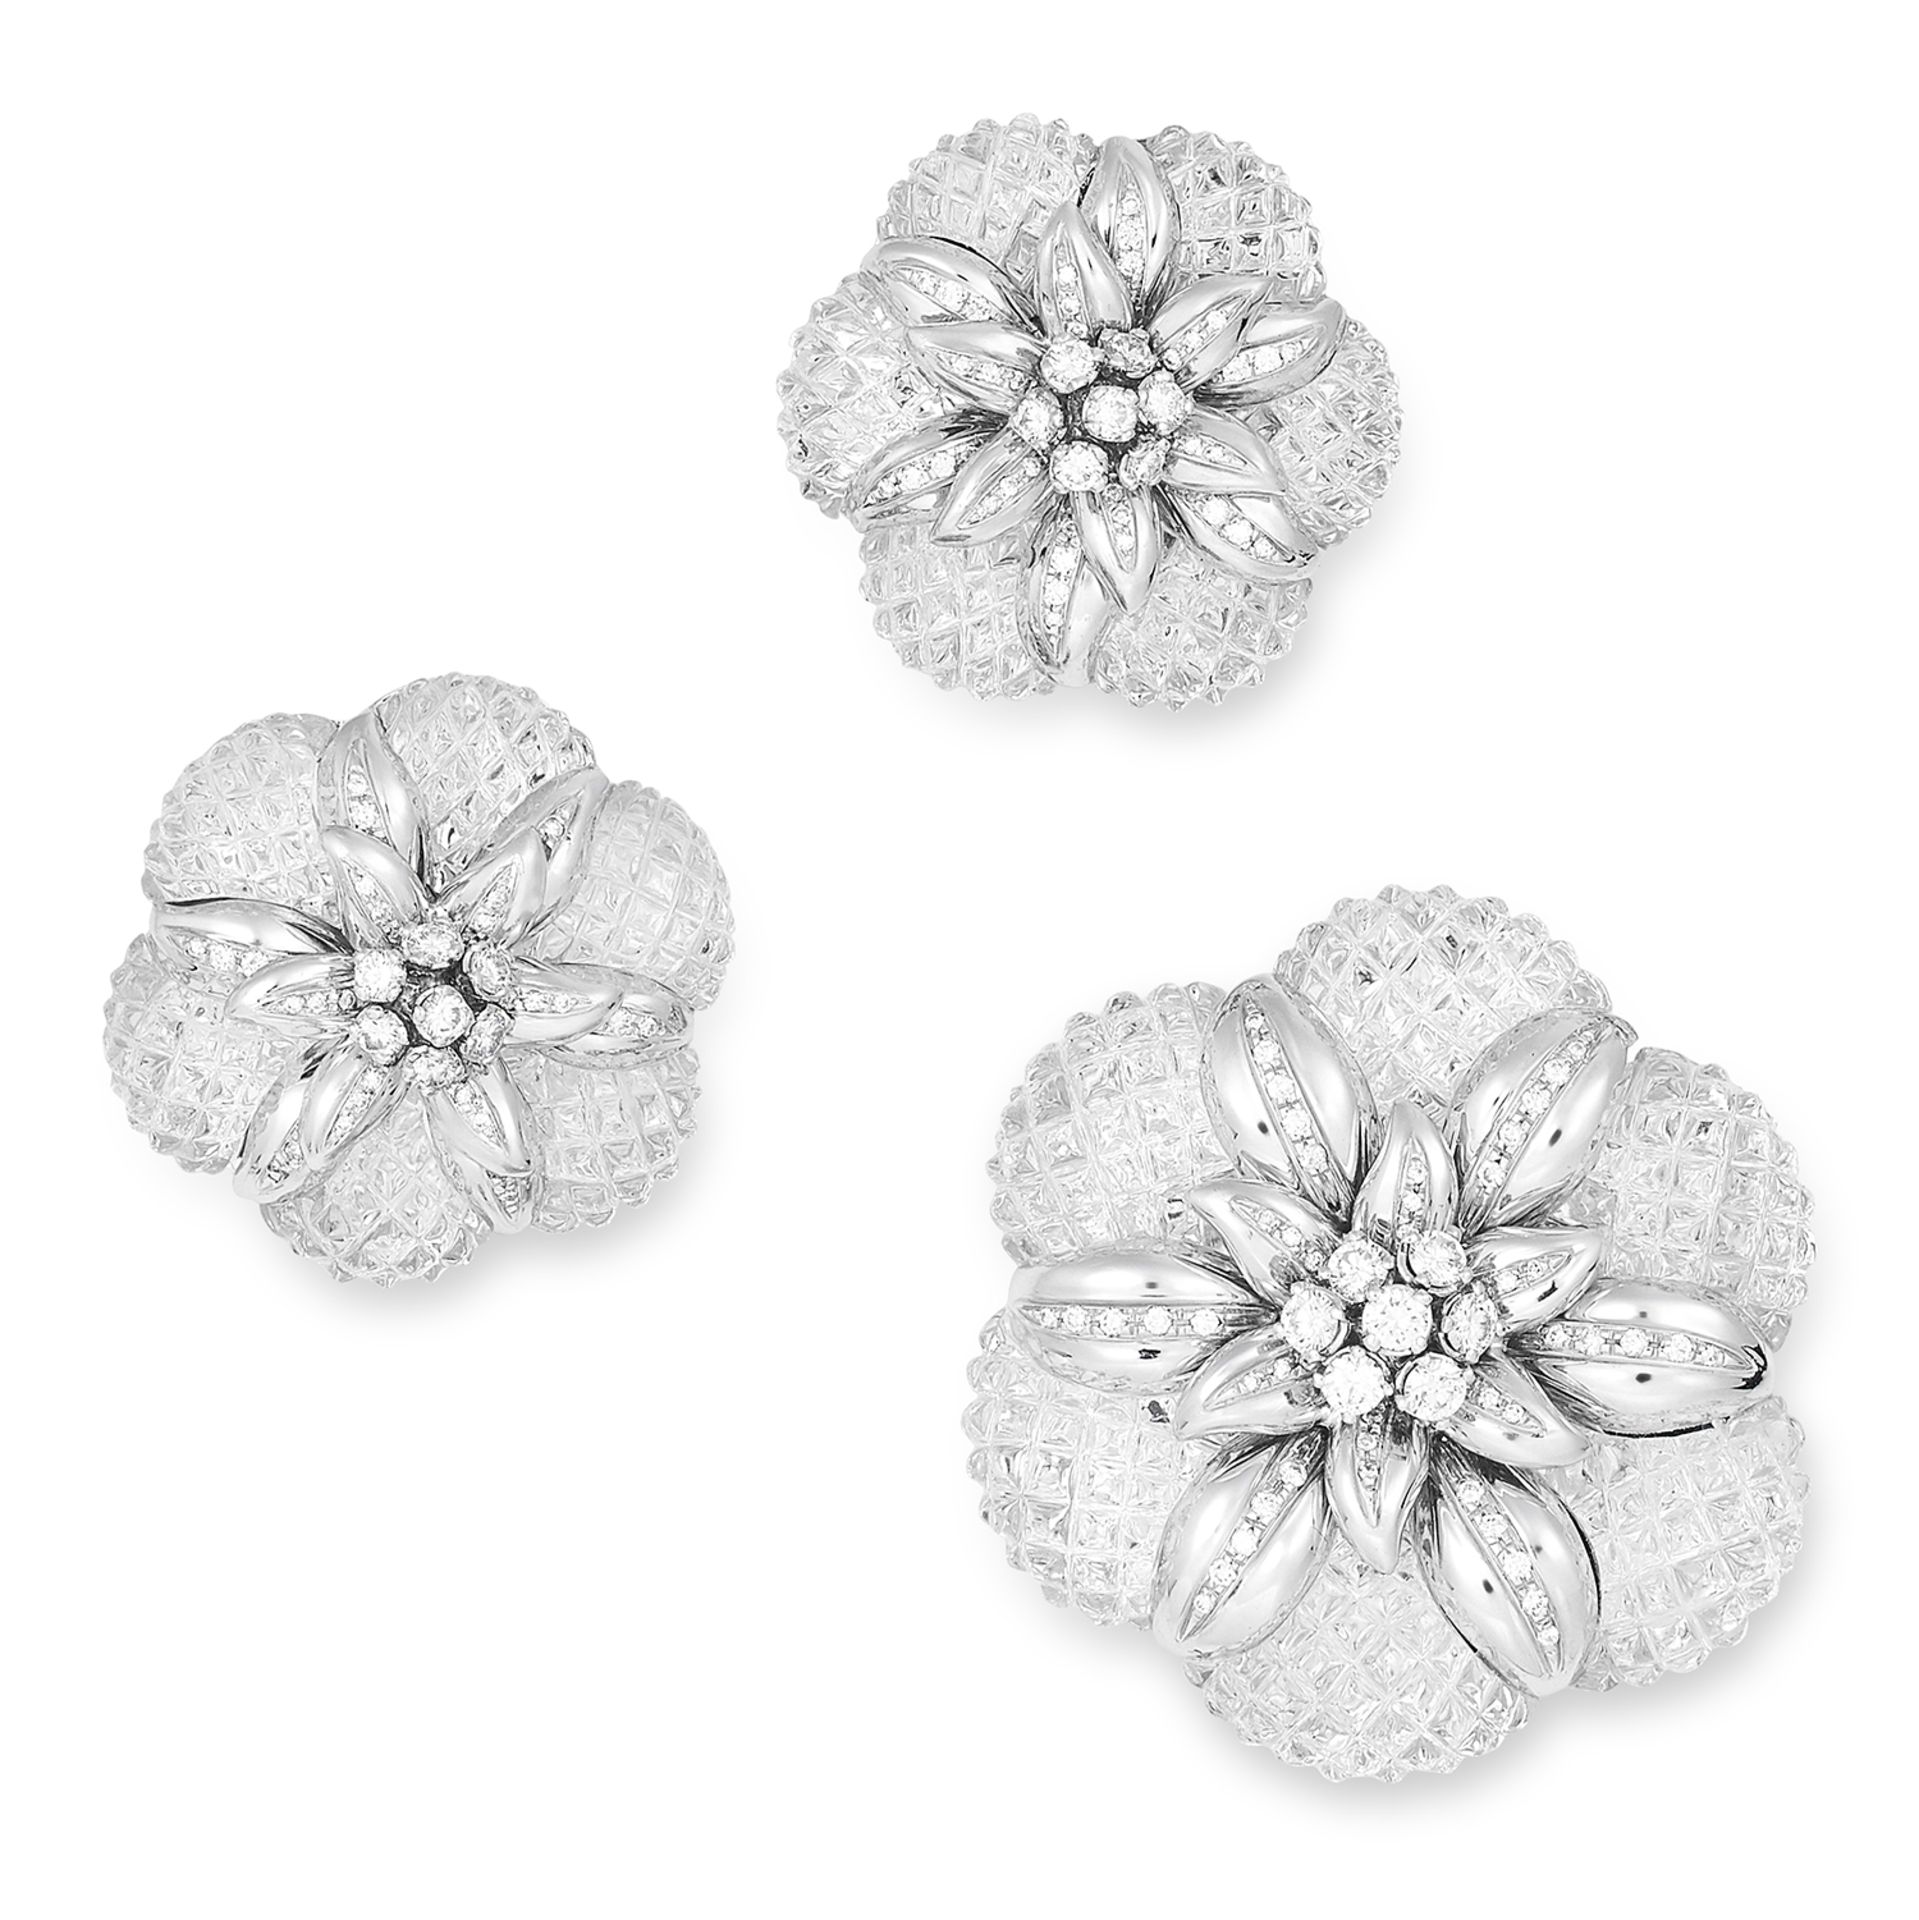 CARVED ROCK CRYSTAL AND DIAMOND BROOCH AND CLIP EARRINGS SUITE, SABBADINI comprising of carved